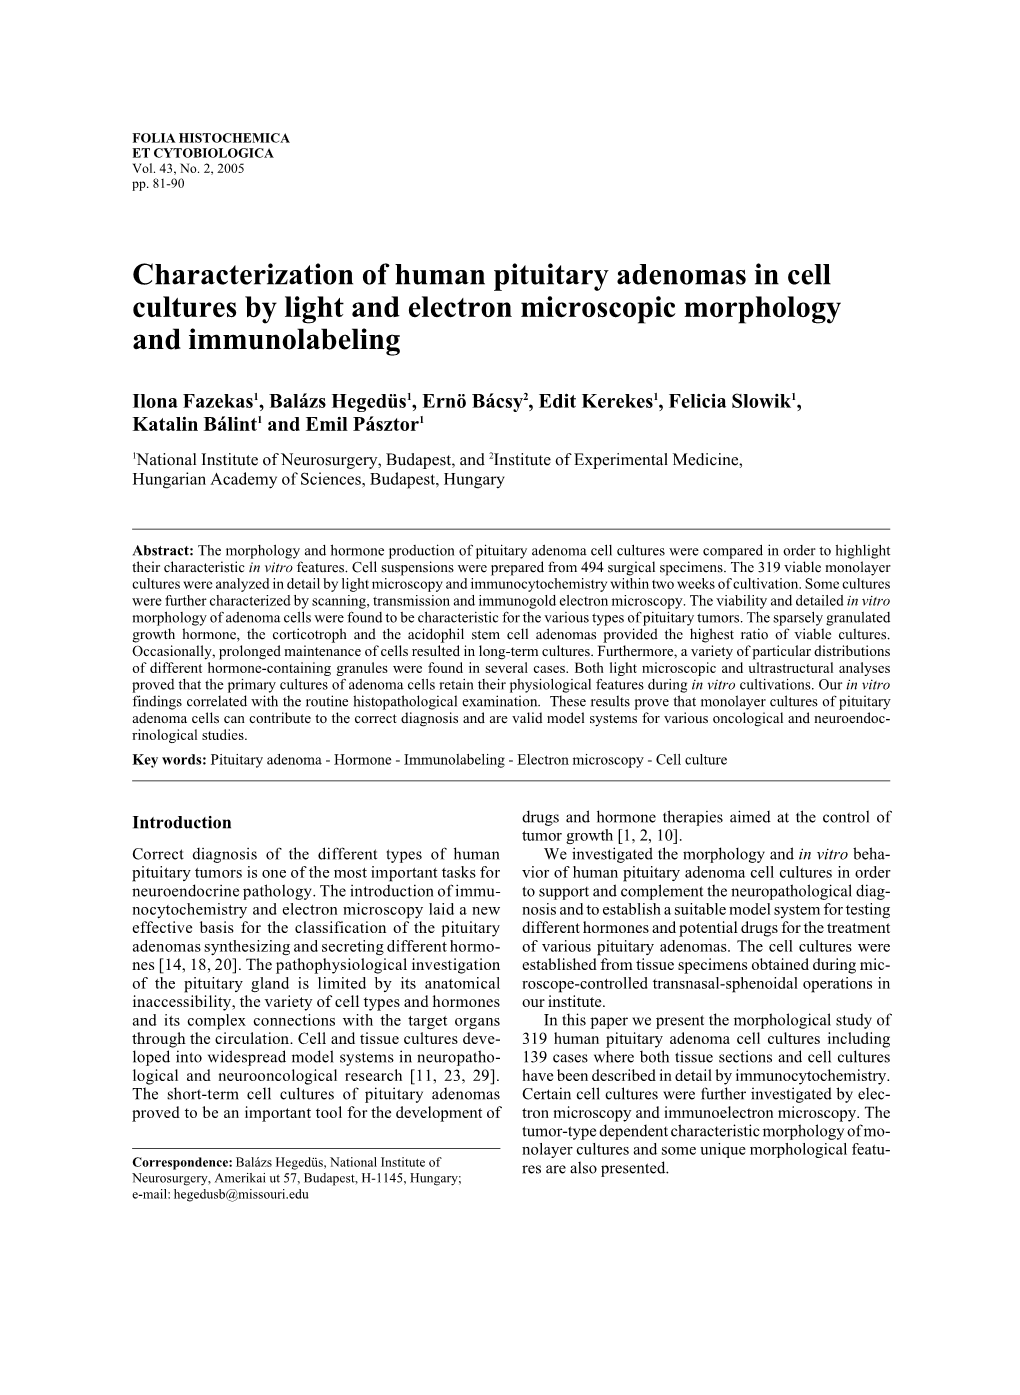 Characterization of Human Pituitary Adenomas in Cell Cultures by Light and Electron Microscopic Morphology and Immunolabeling